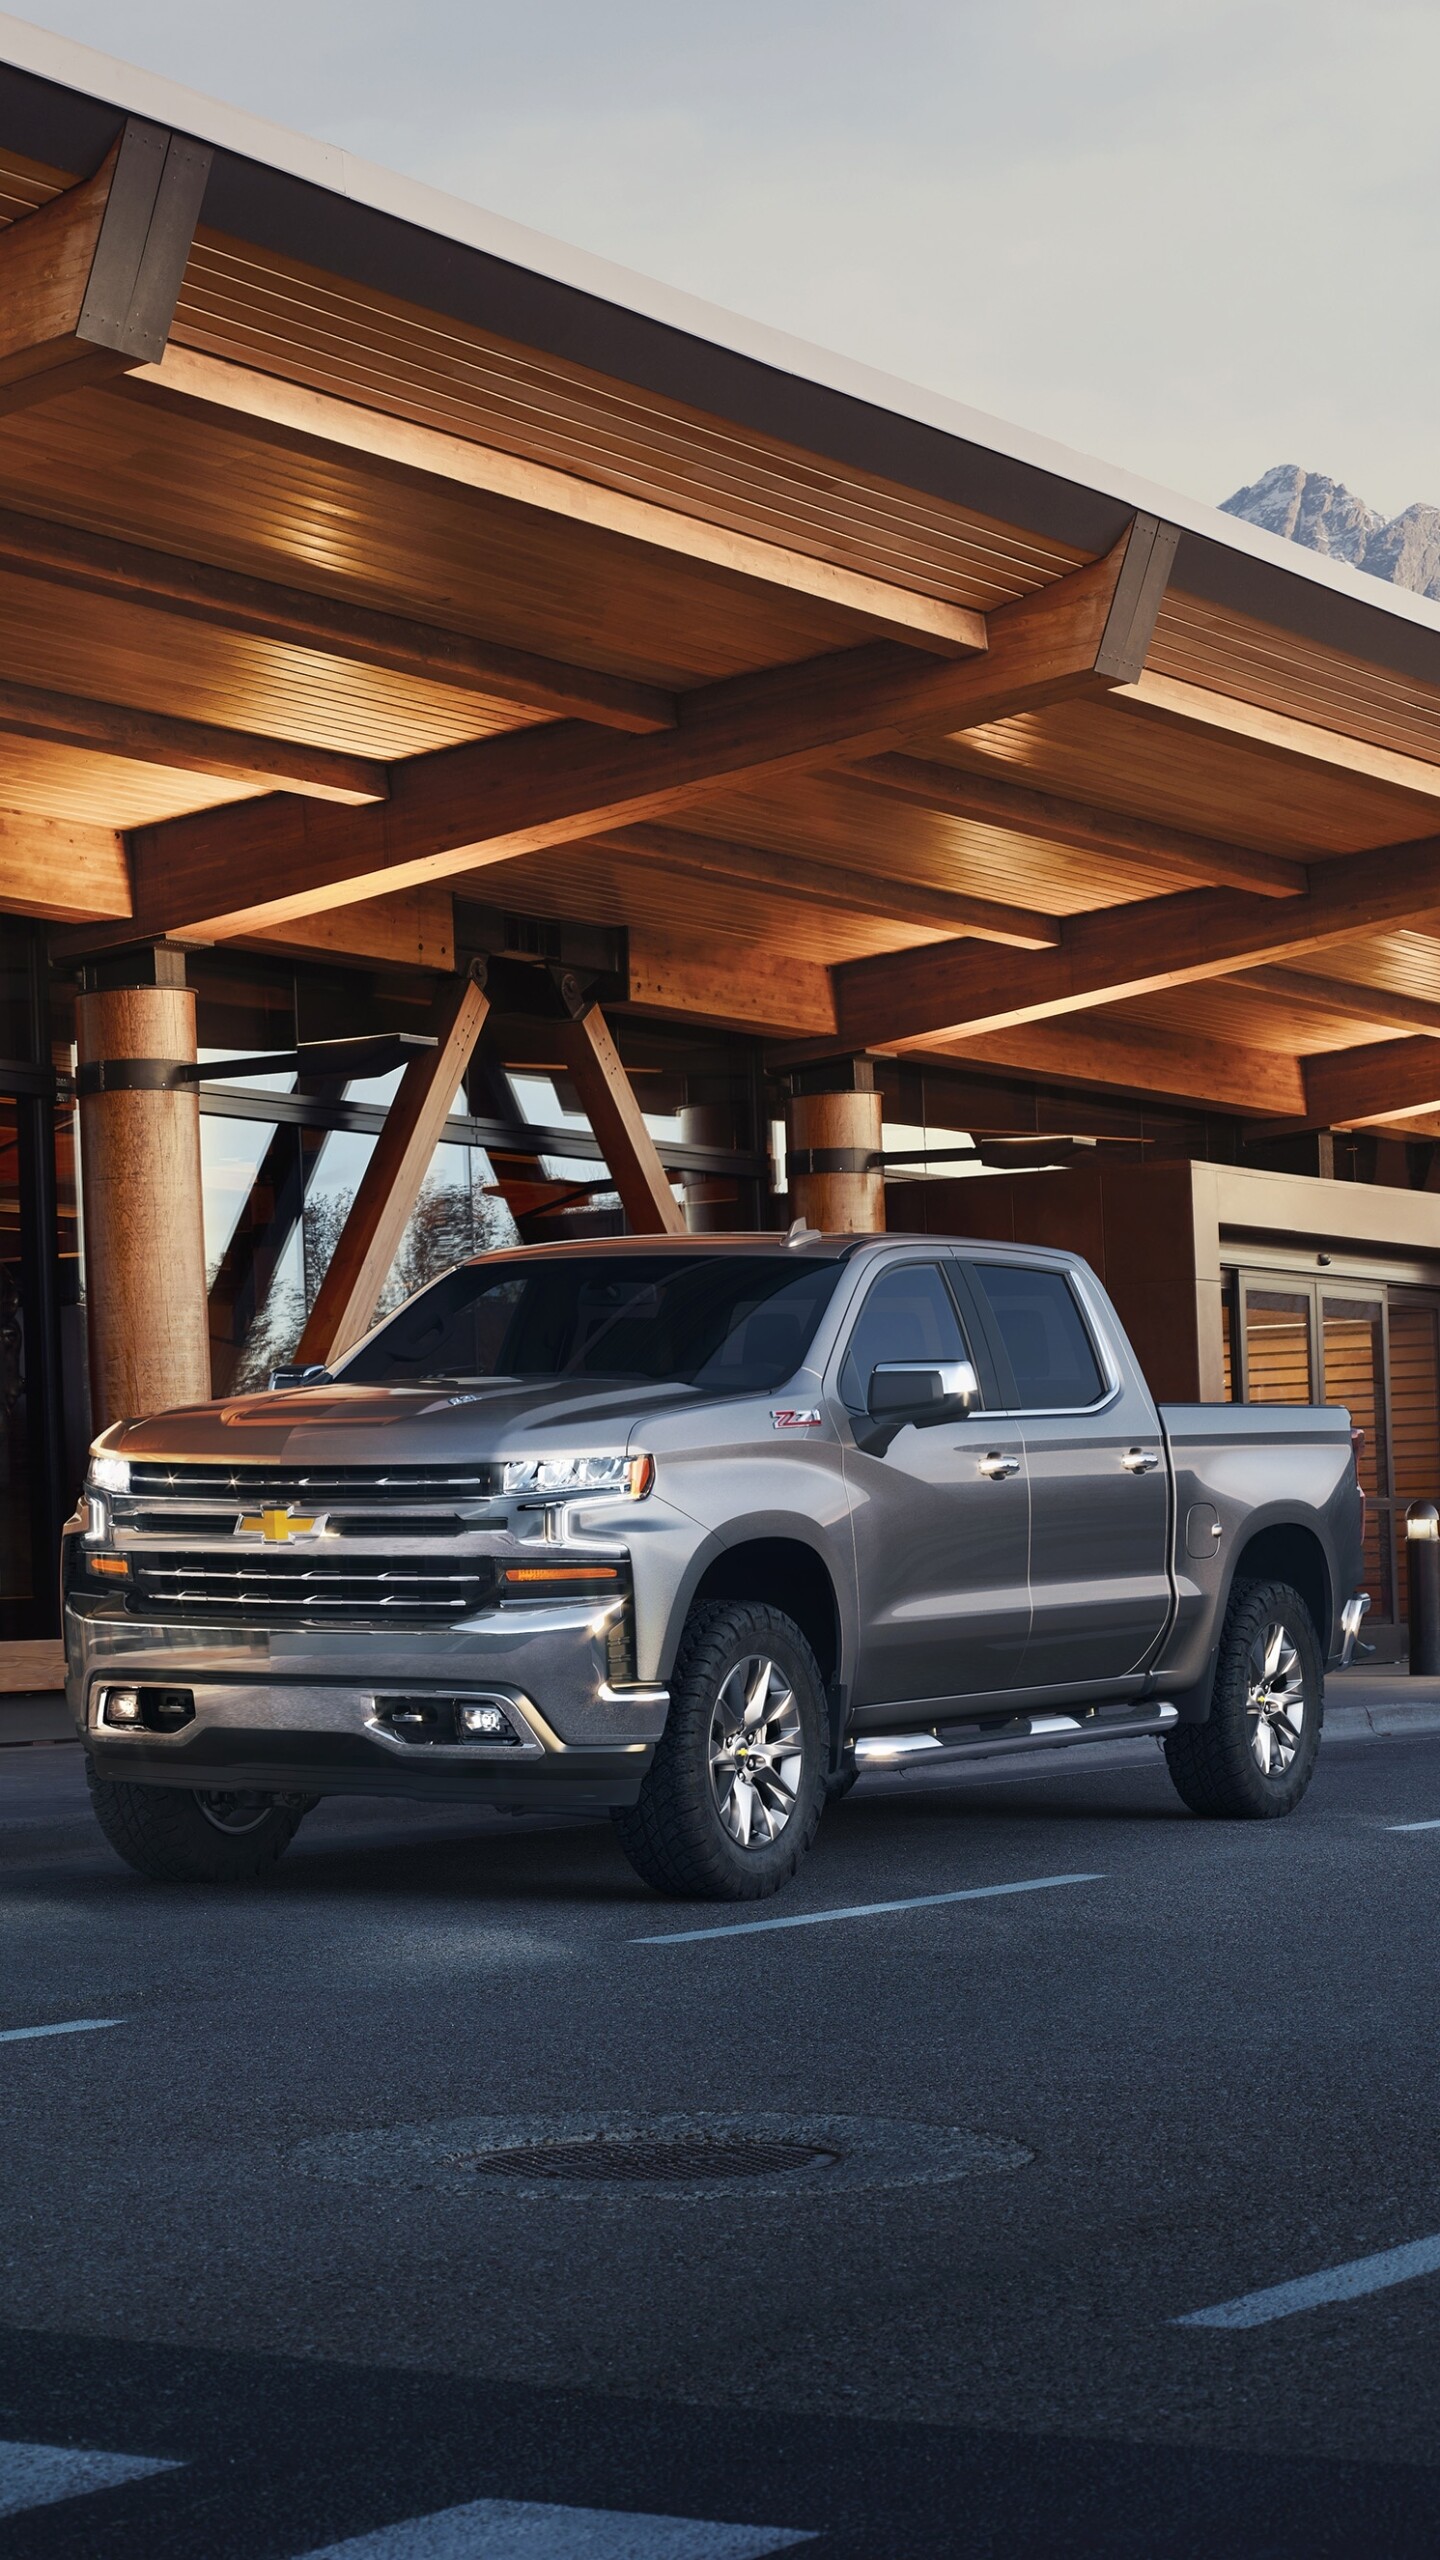 Chevrolet Silverado: The Z71 package, Chevy's signature off-road package, Heavy-duty vehicles. 1440x2560 HD Wallpaper.